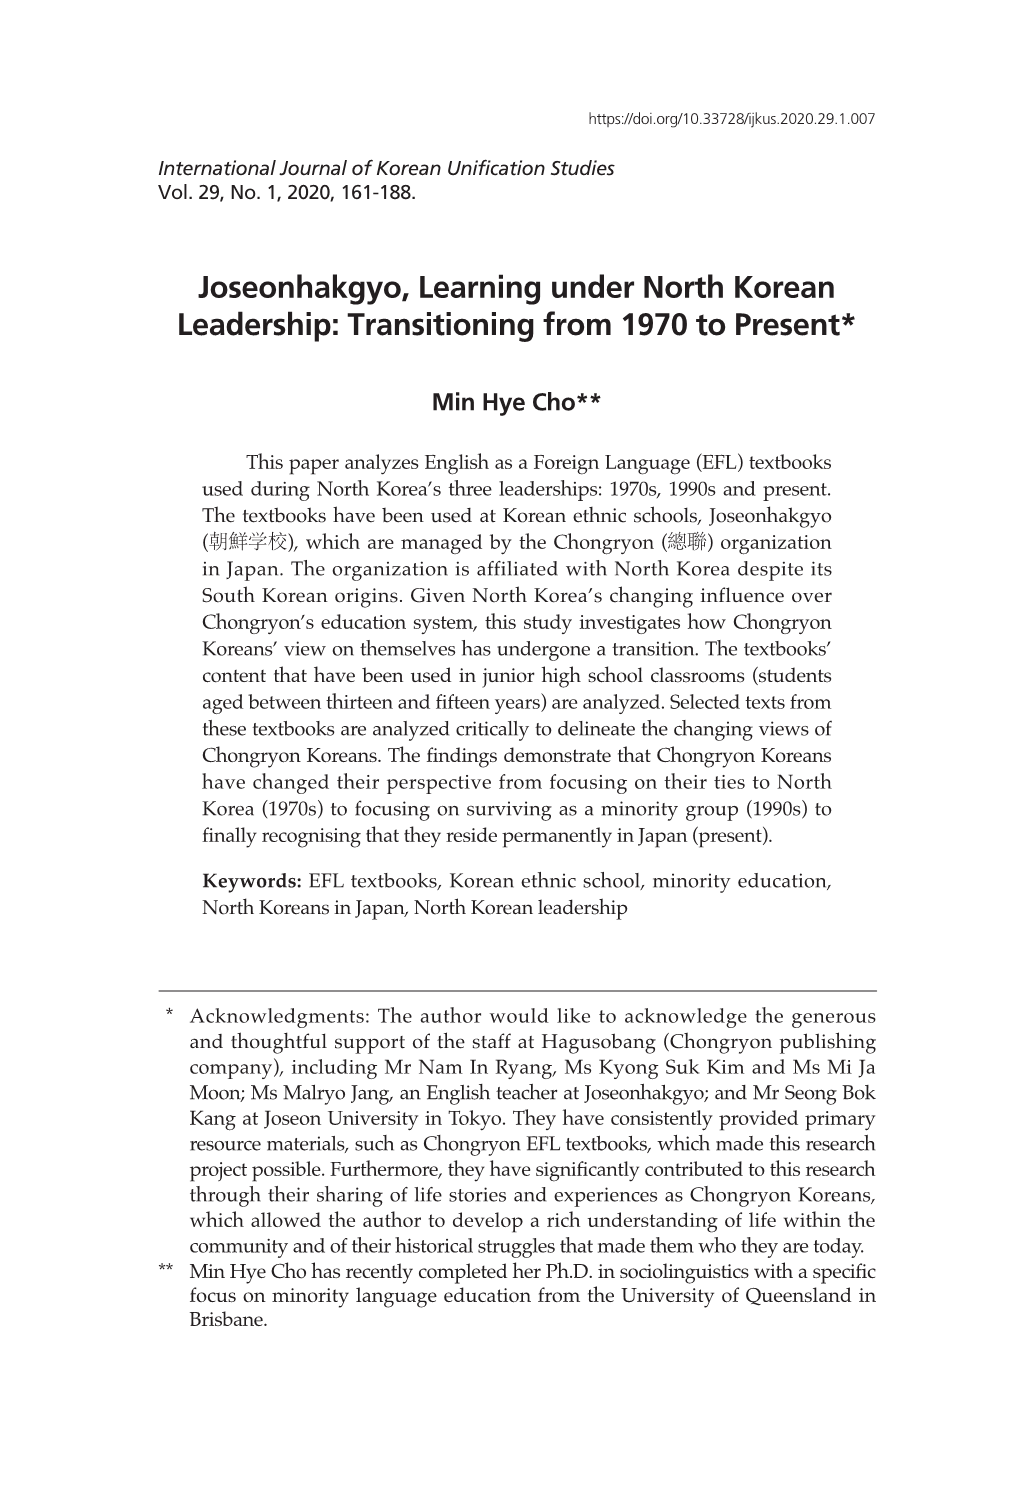 Joseonhakgyo, Learning Under North Korean Leadership: Transitioning from 1970 to Present*